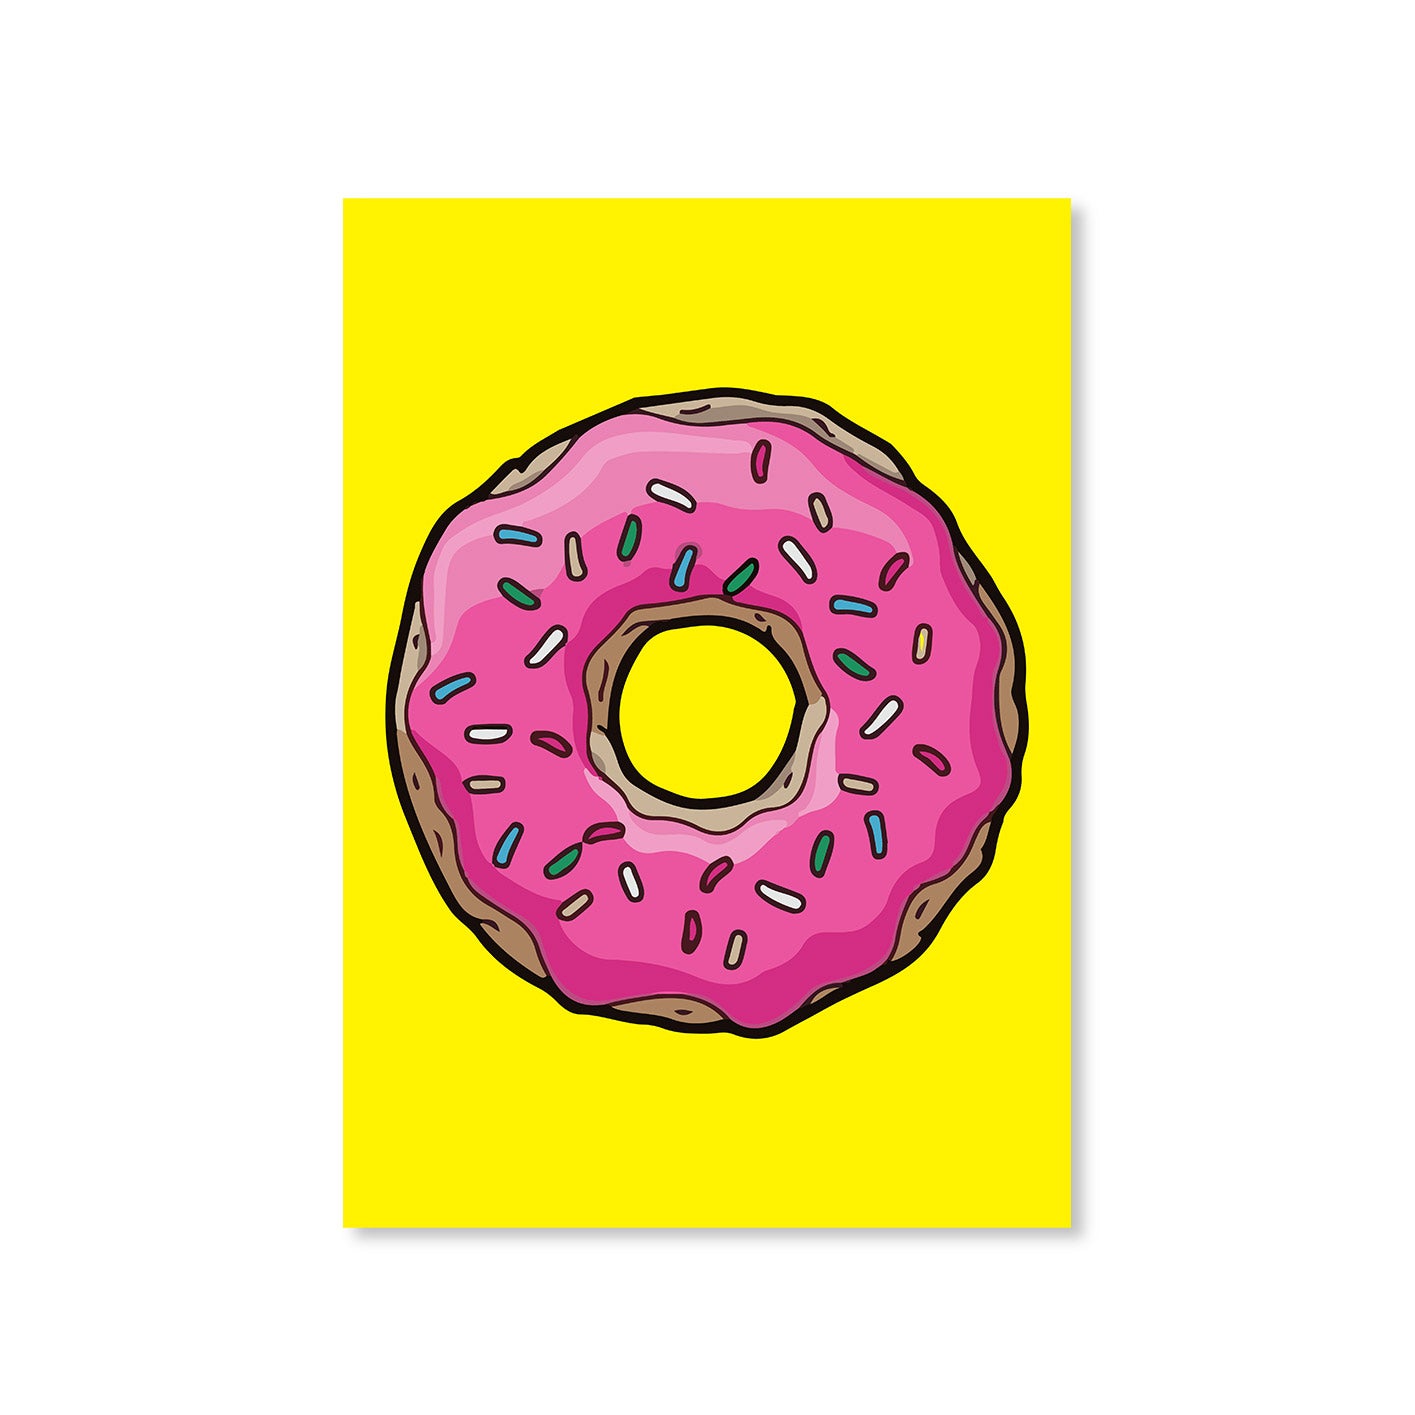 The Simpsons Poster by The Banyan Tee Poster for Wall Poster Design - Donut